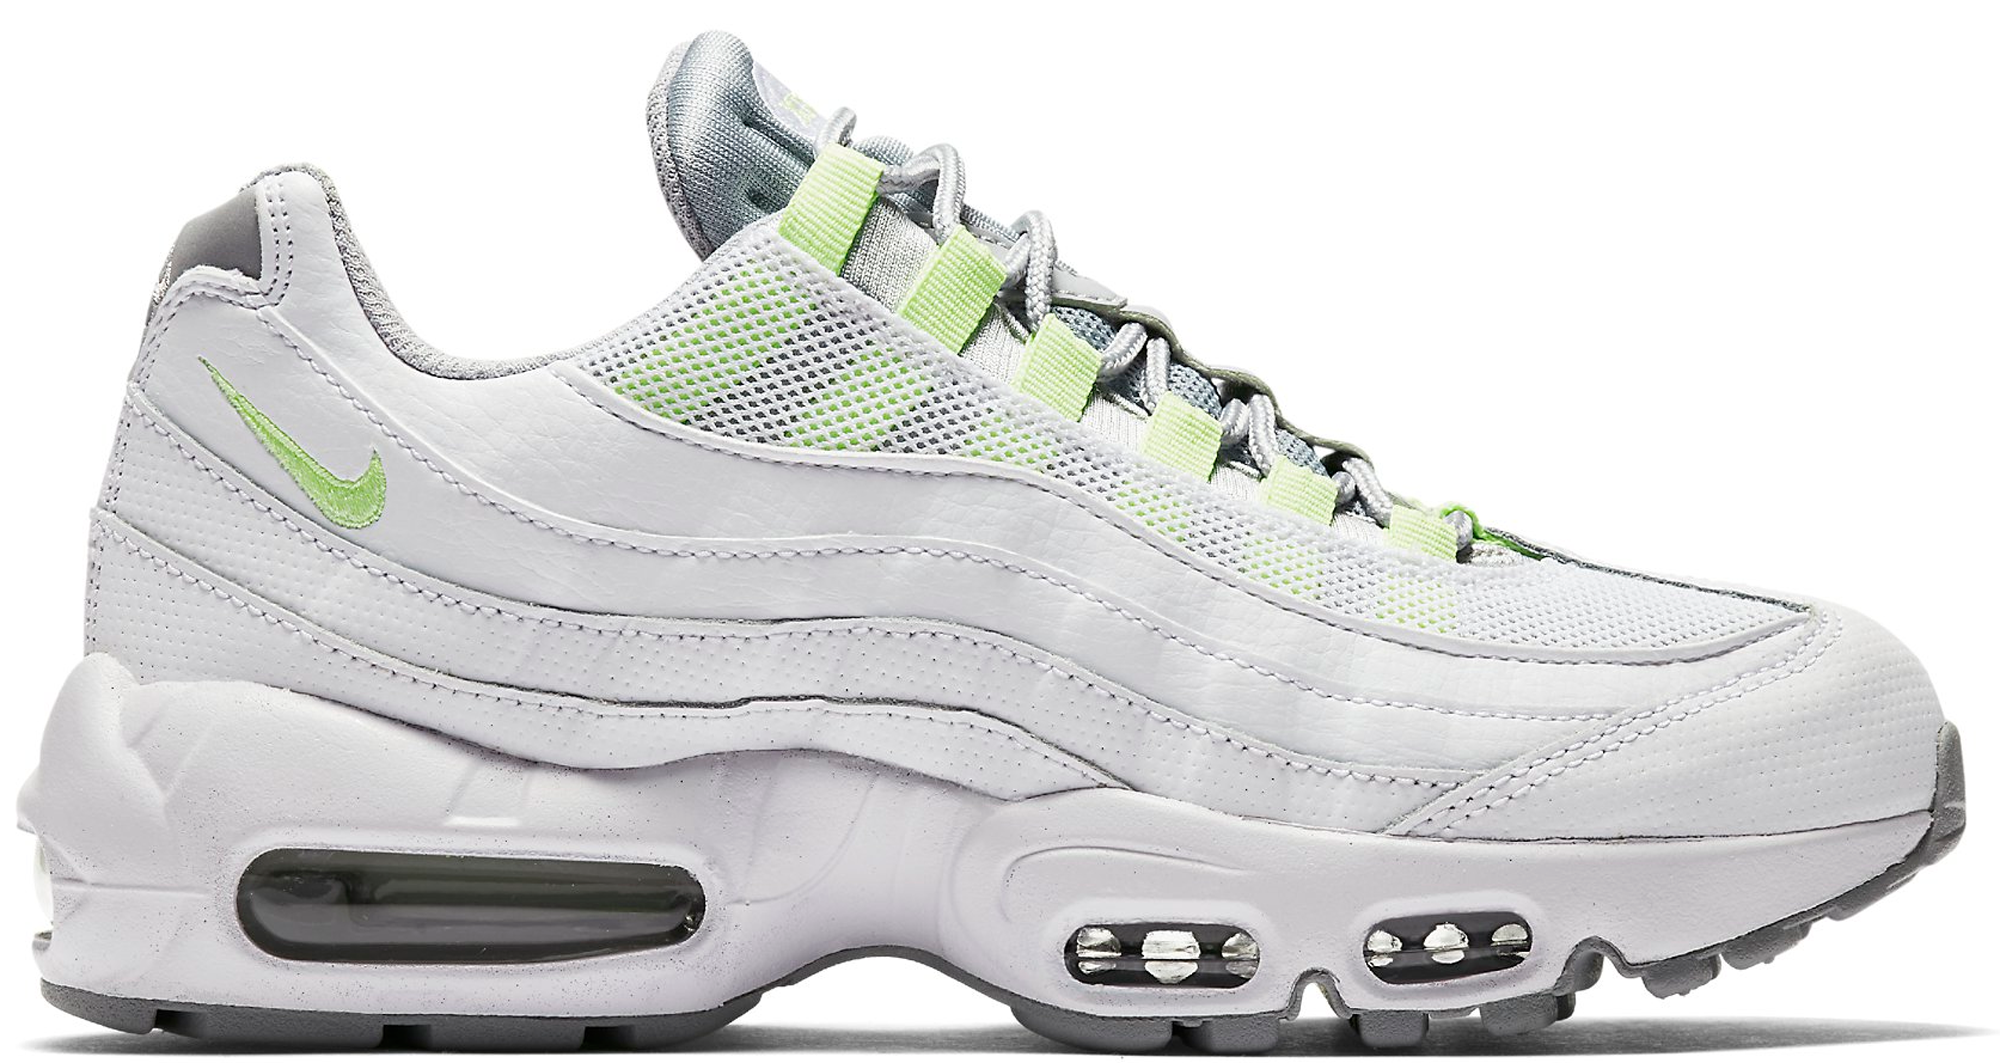 lime green and white air max 95